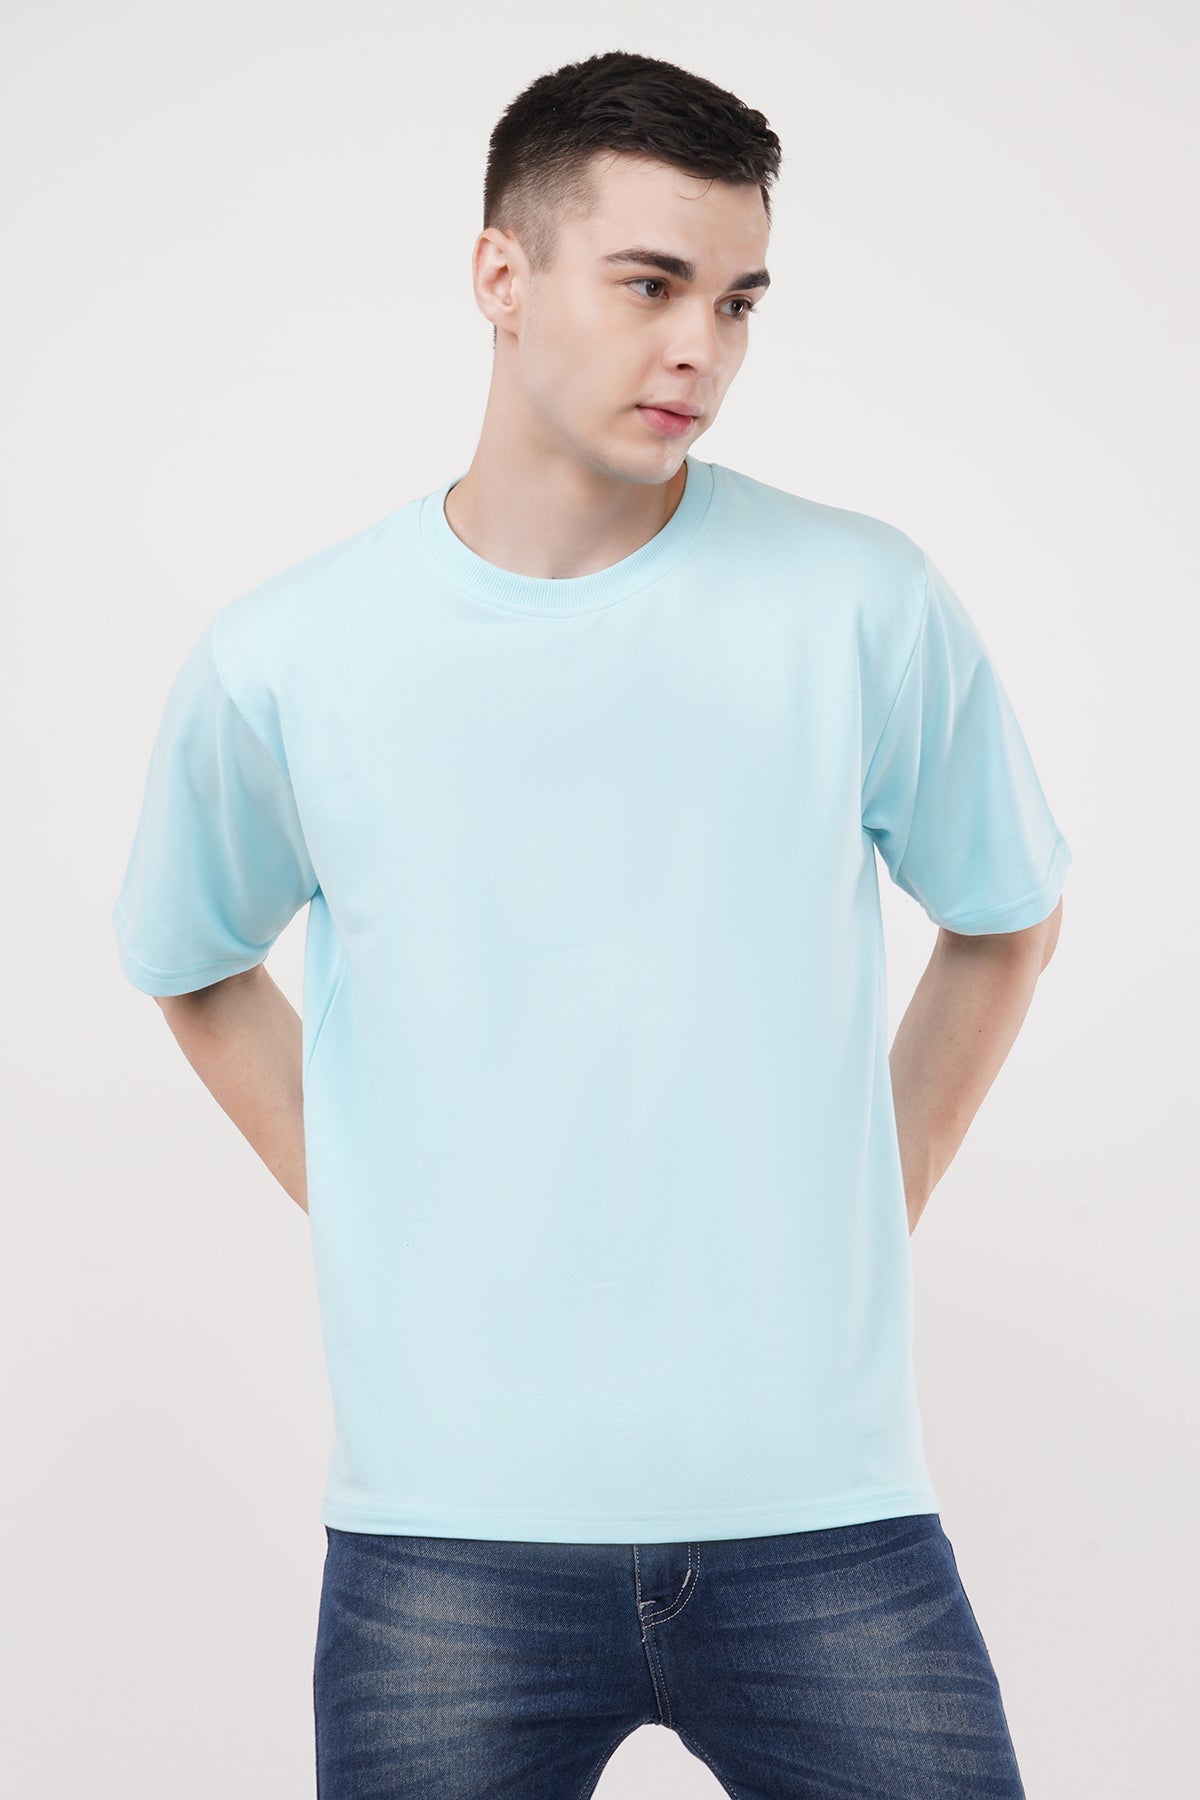 Super Soft Roundneck Half Sleeve Oversized T-Shirt in Multiple Colors - Shop Now!